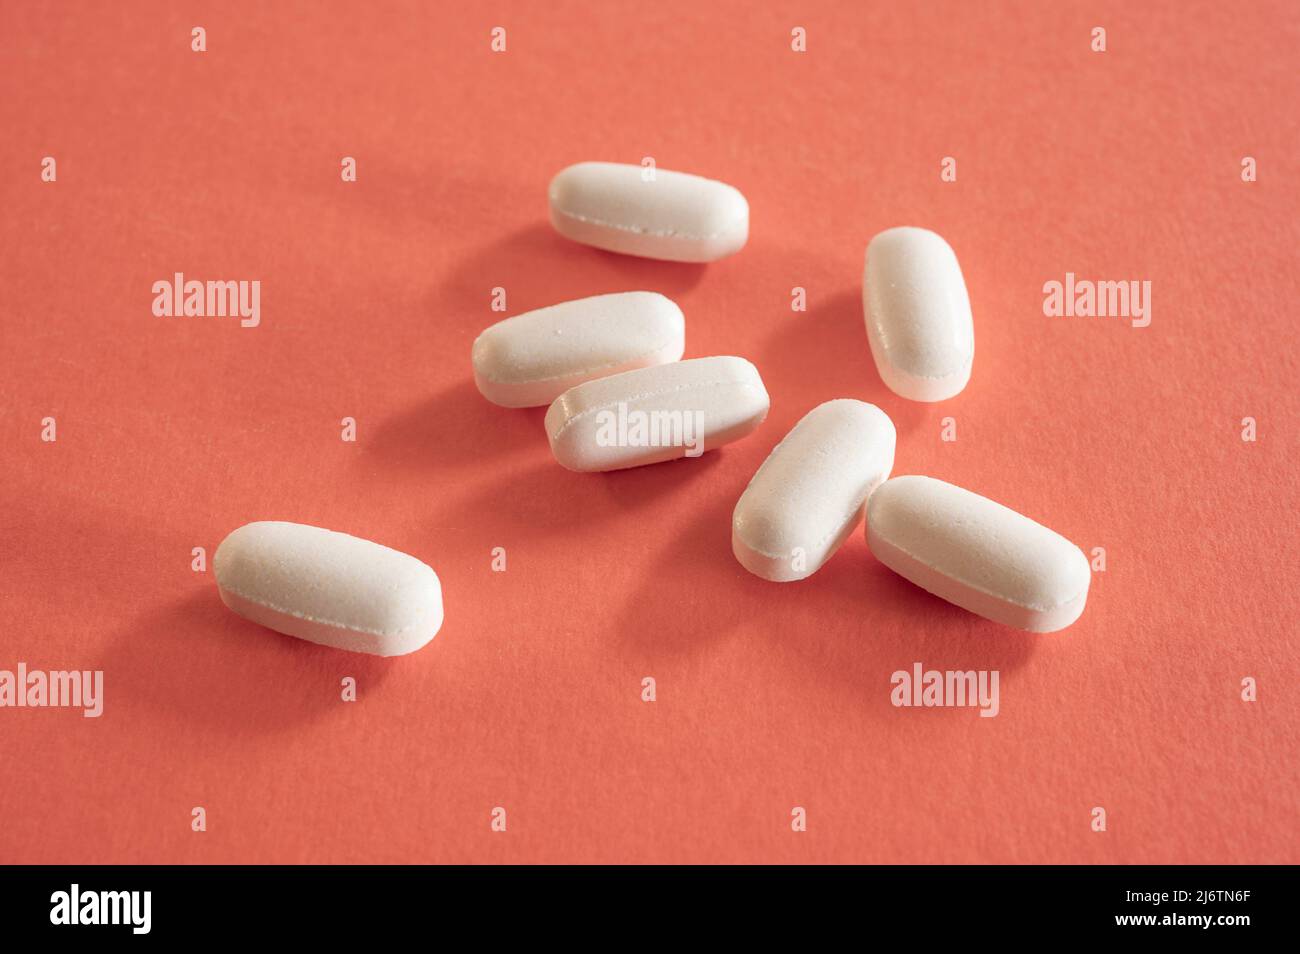 Closeup of with pills on red background Stock Photo